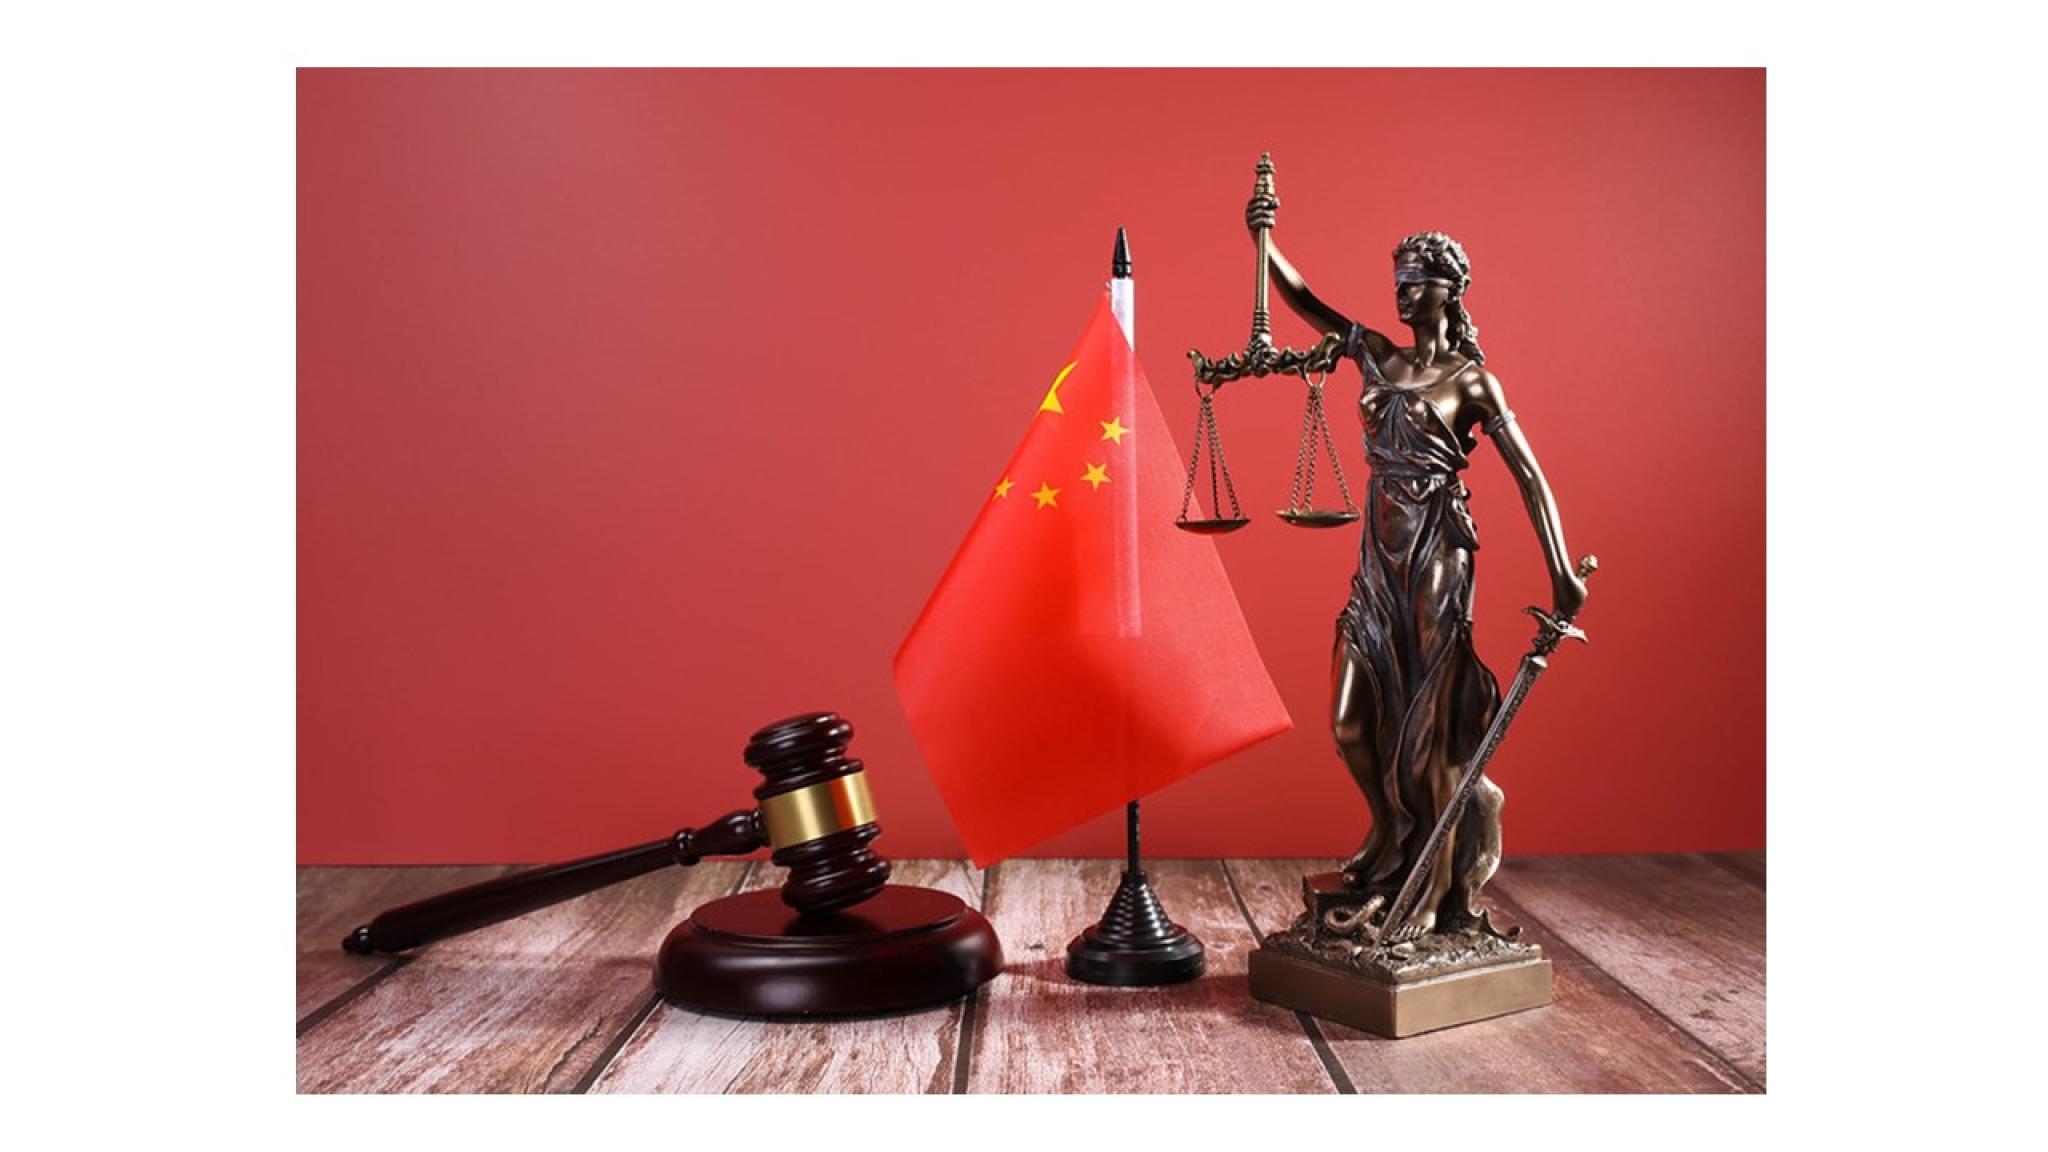 Image of a statue of Lady Justice, a judge’s gavel and a flag of China by Marco Verch on https://flic.kr/p/2n4XvCZ (CC BY 2.0) https://creativecommons.org/licenses/by/2.0/